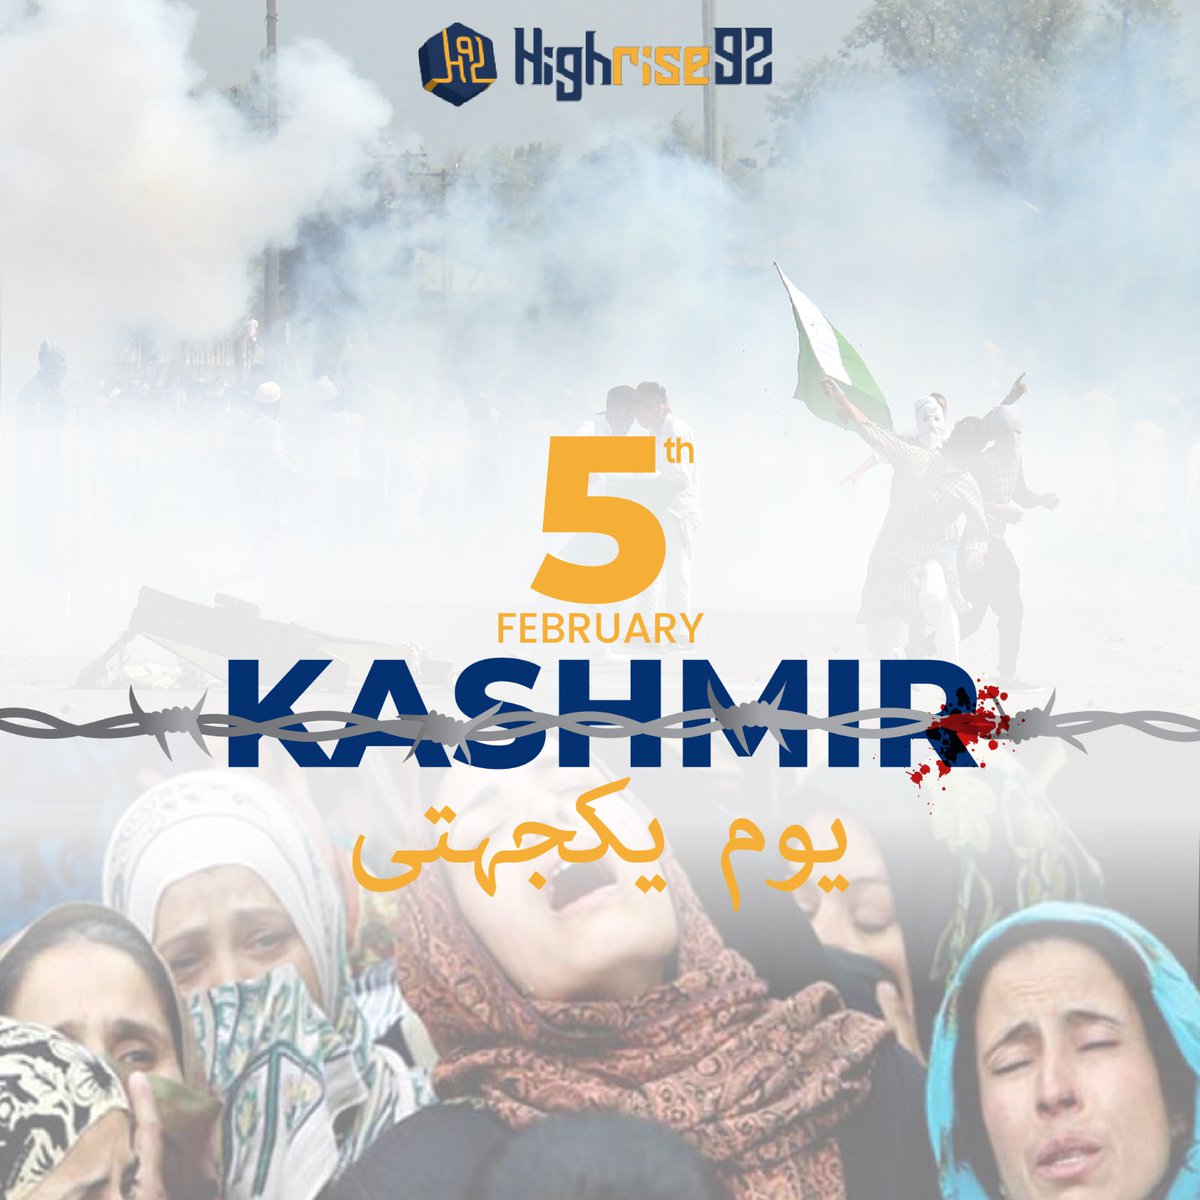 There is nothing as beautiful as Kashmir in this world and it will be more beautiful when it will be all united. Happy Kashmir Solidarity Day.

#highrise92 #profits #investments #investors
#realestate #realestateinvesting #realestatetips
#realestategoals #propertysolutions